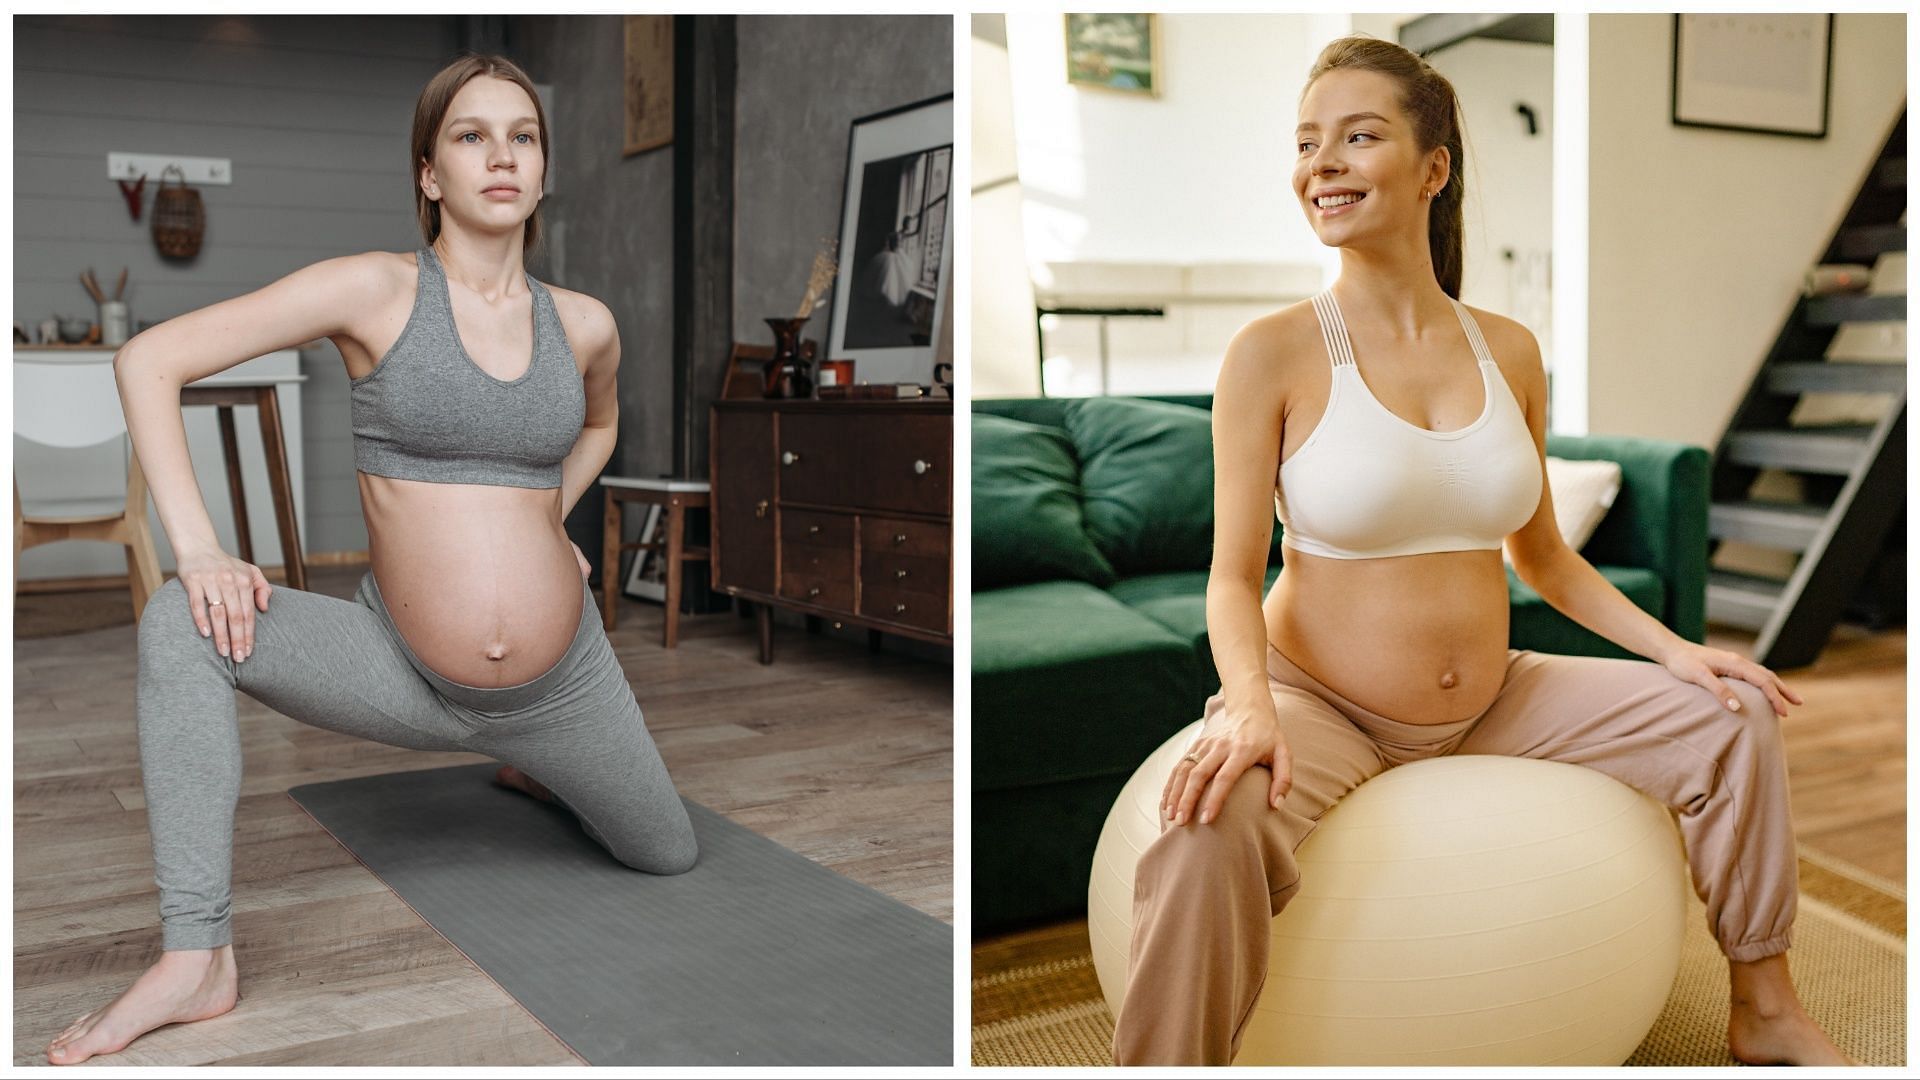 Birthing ball exercises are a great addition to the routine. (Image via Pexels/ Yan Krukau)